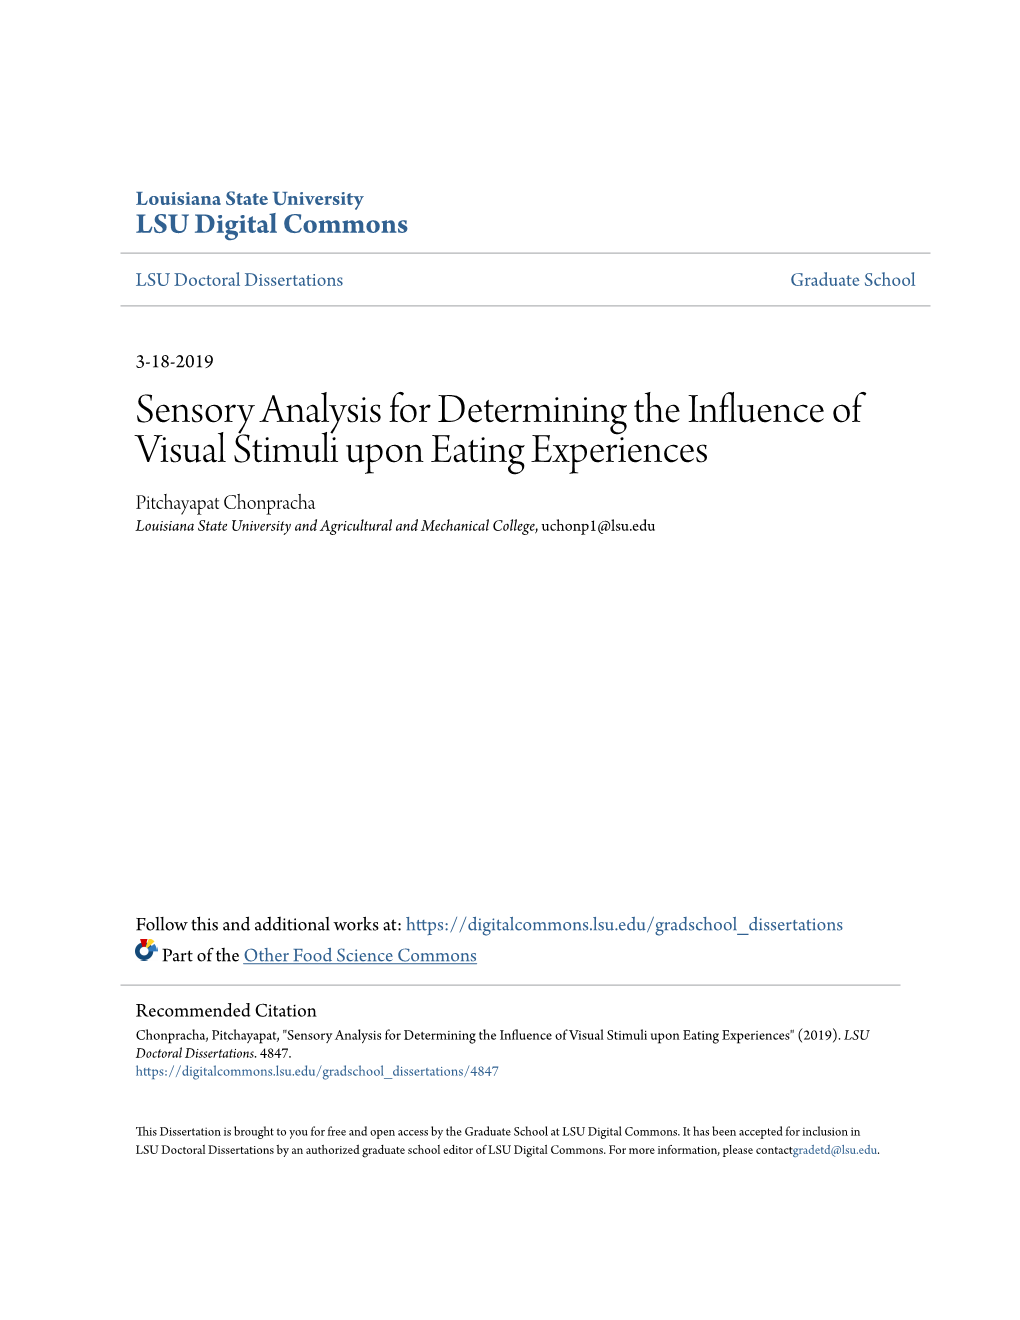 Sensory Analysis for Determining the Influence of Visual Stimuli Upon Eating Experiences